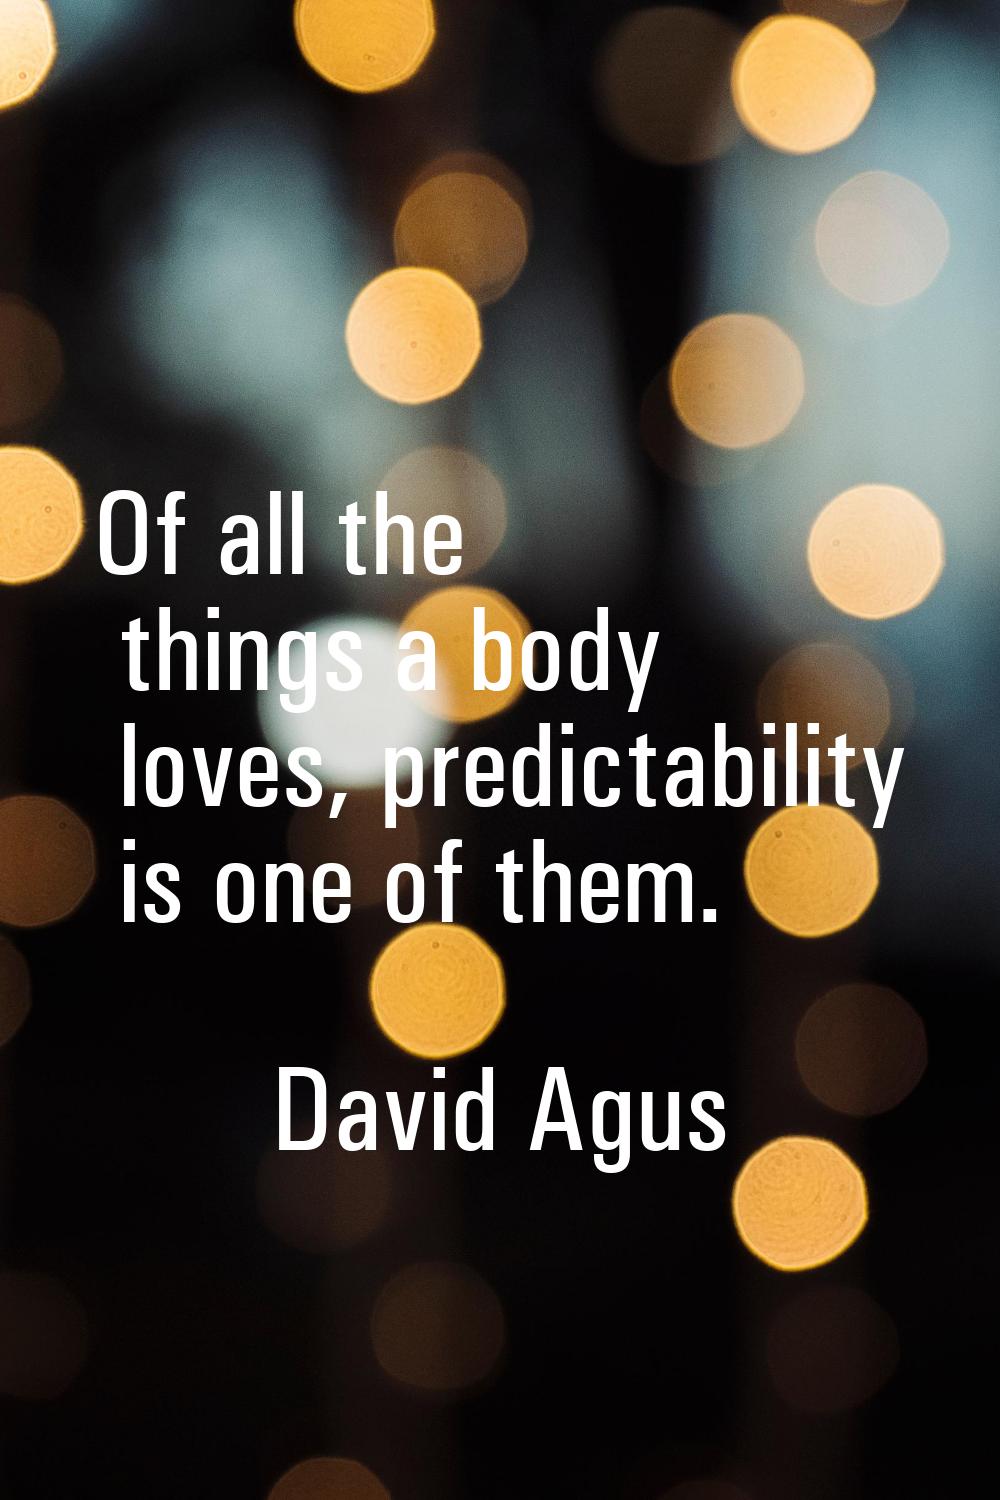 Of all the things a body loves, predictability is one of them.